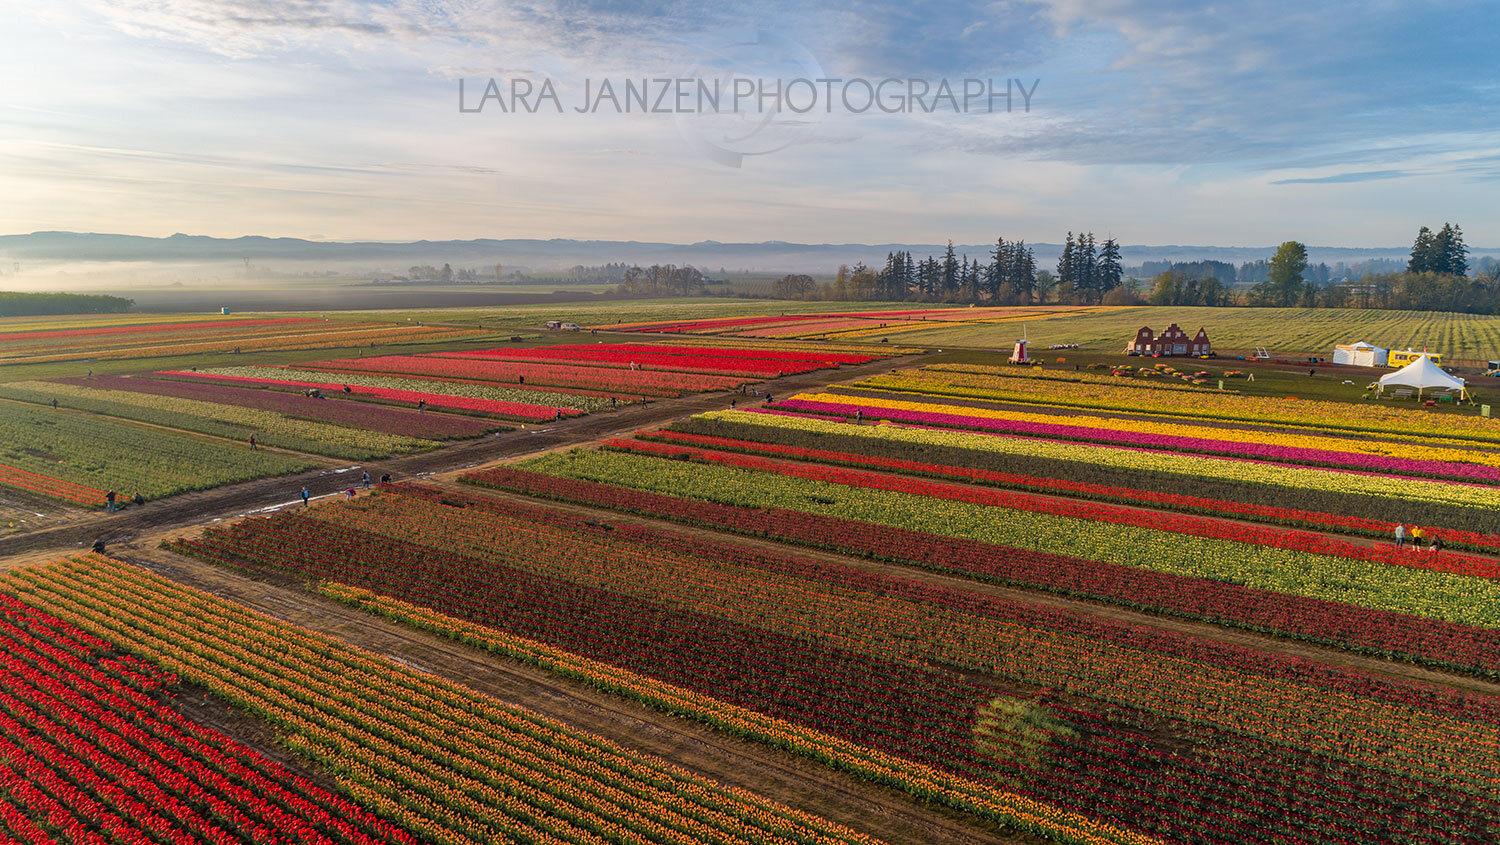 The colorful fields of the Wooden Shoe Tulip Festival